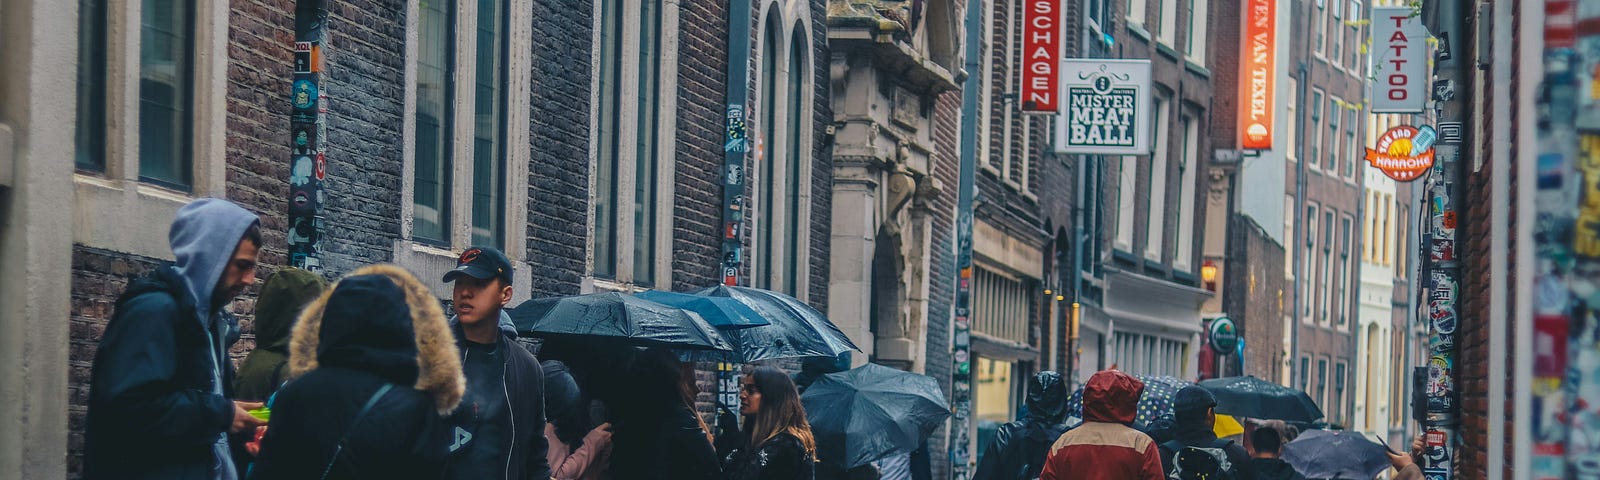 People crowded together on a narrow street with umbrellas.